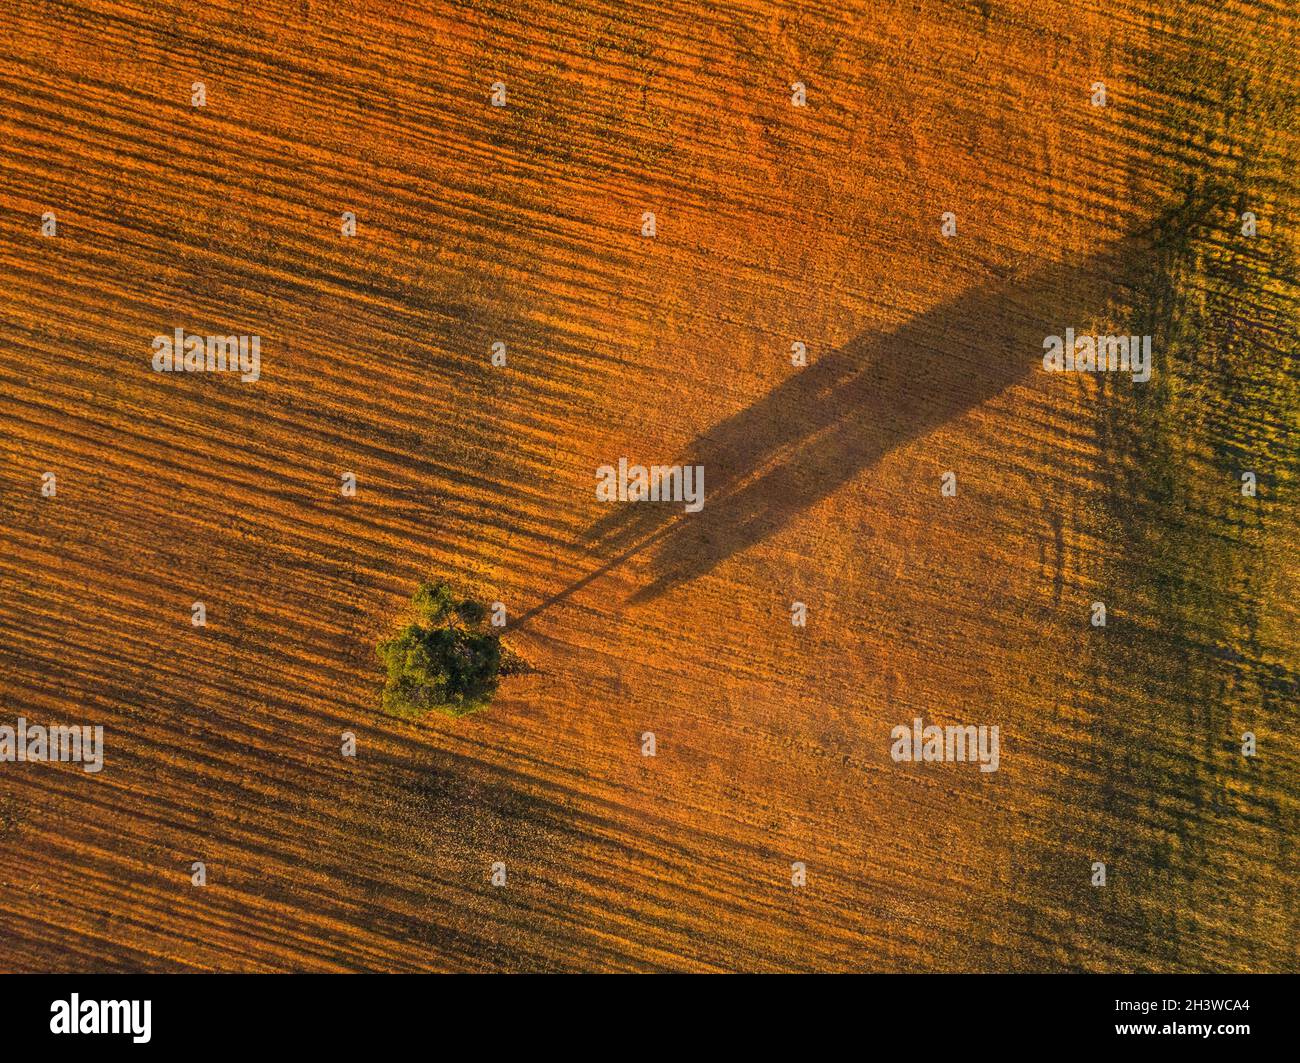 Beautiful-isolated tree casts its long shadow at sunset over a field Stock Photo